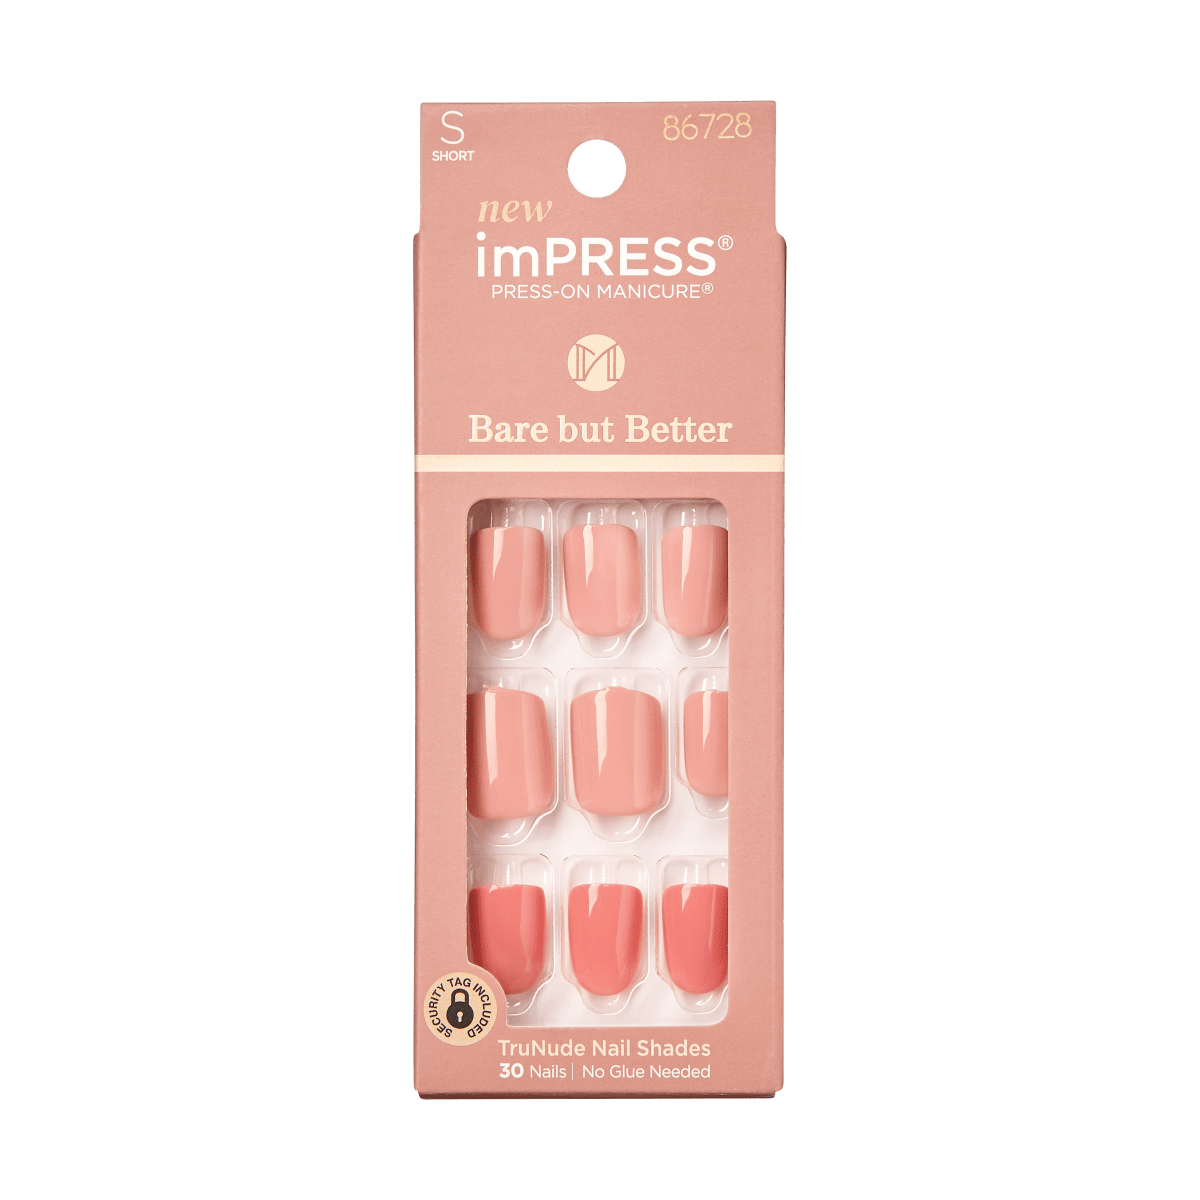 imPRESS Bare but Better Press-On Manicure - New Boo